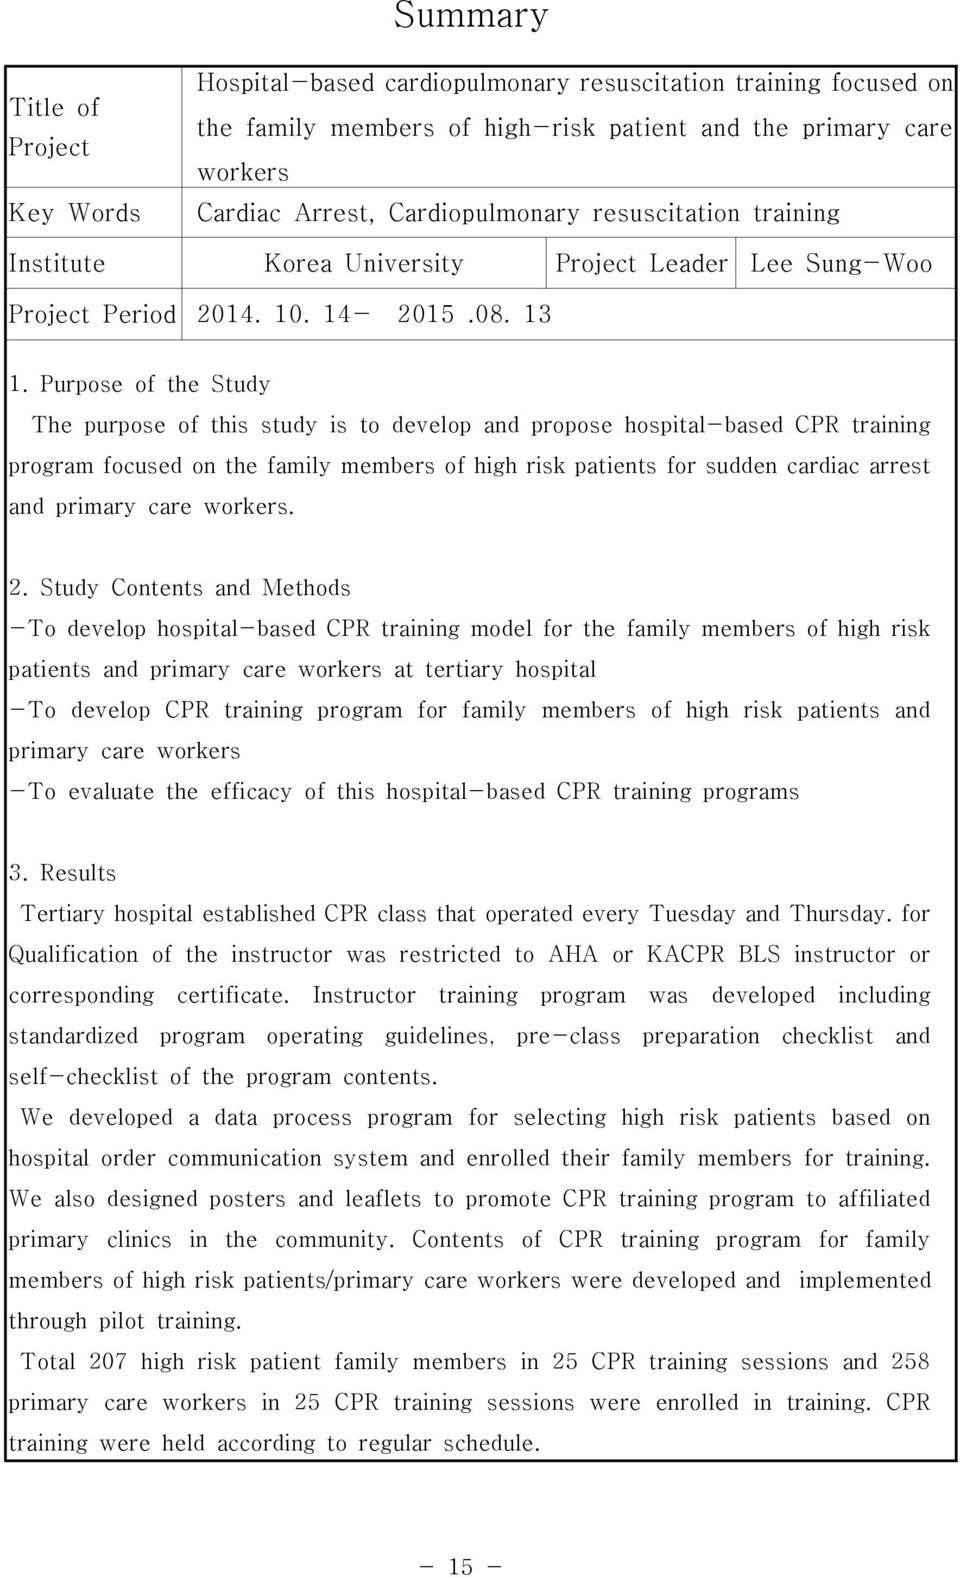 Purpose of the Study The purpose of this study is to develop and propose hospital-based CPR training program focused on the family members of high risk patients for sudden cardiac arrest and primary